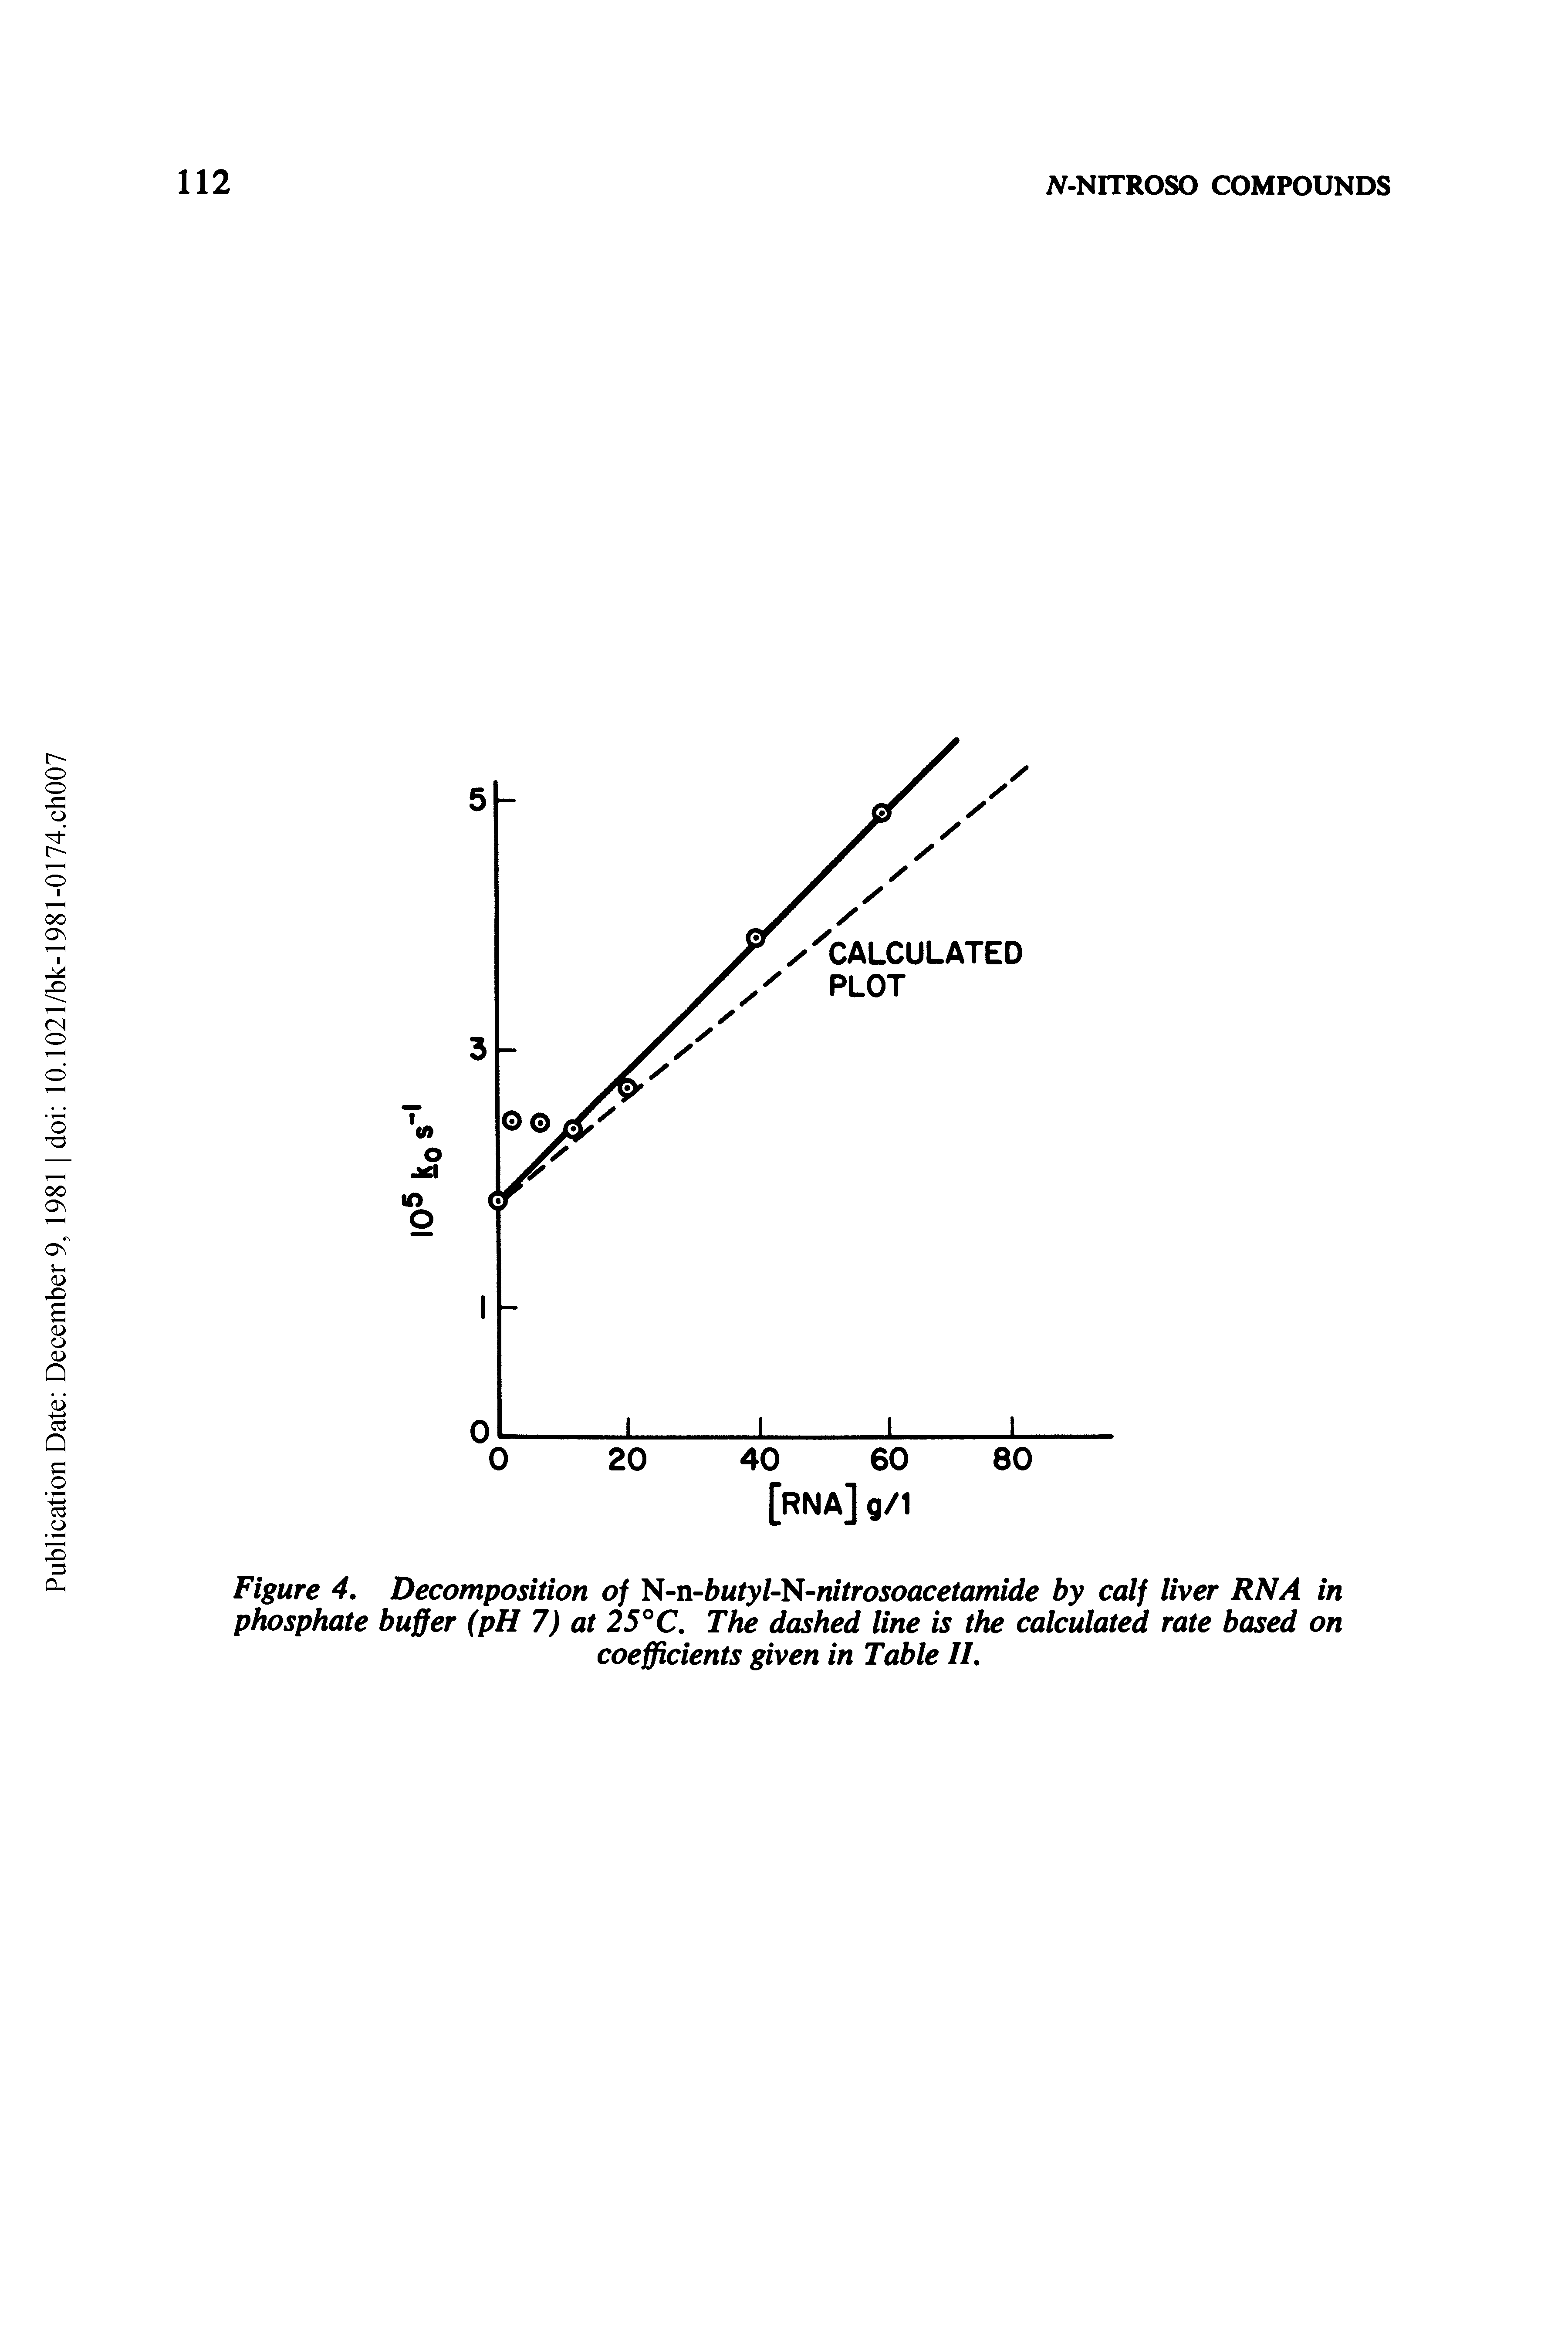 Figure 4, Decomposition of -n-butyU t -nitrosoacetamide by calf liver RNA in phosphate buffer (pH 7) at 25°C, The dashed line is the calculated rate based on coefficients given in Table II,...